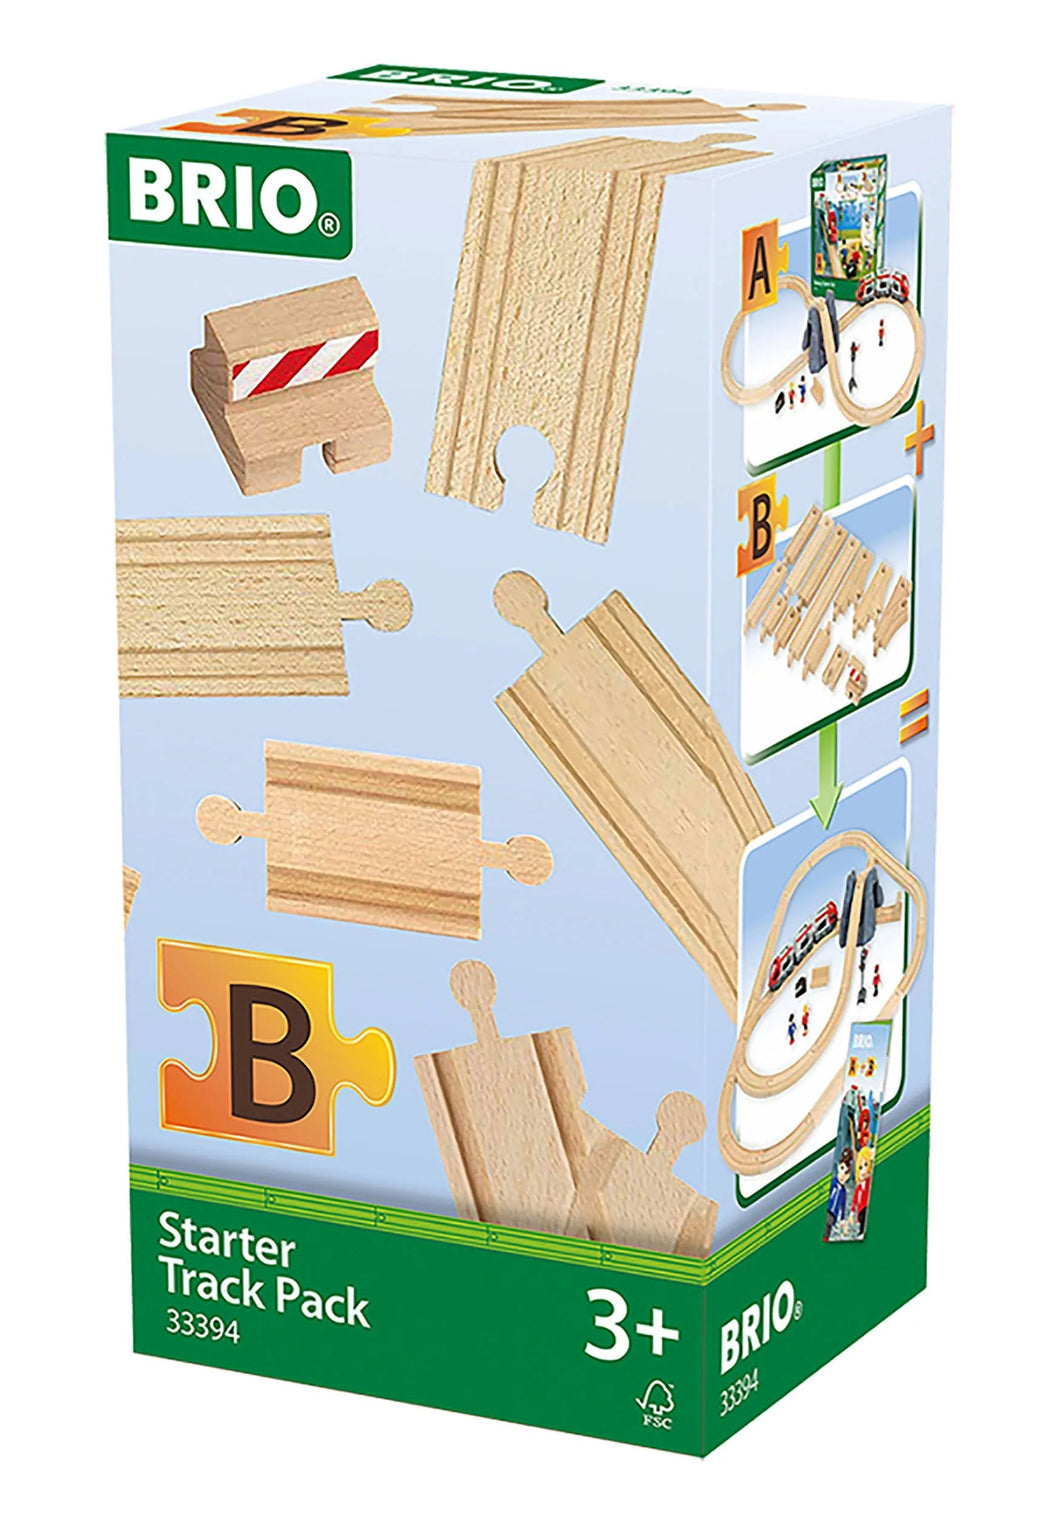 Brio Strater Track Pack - Pack B 33394